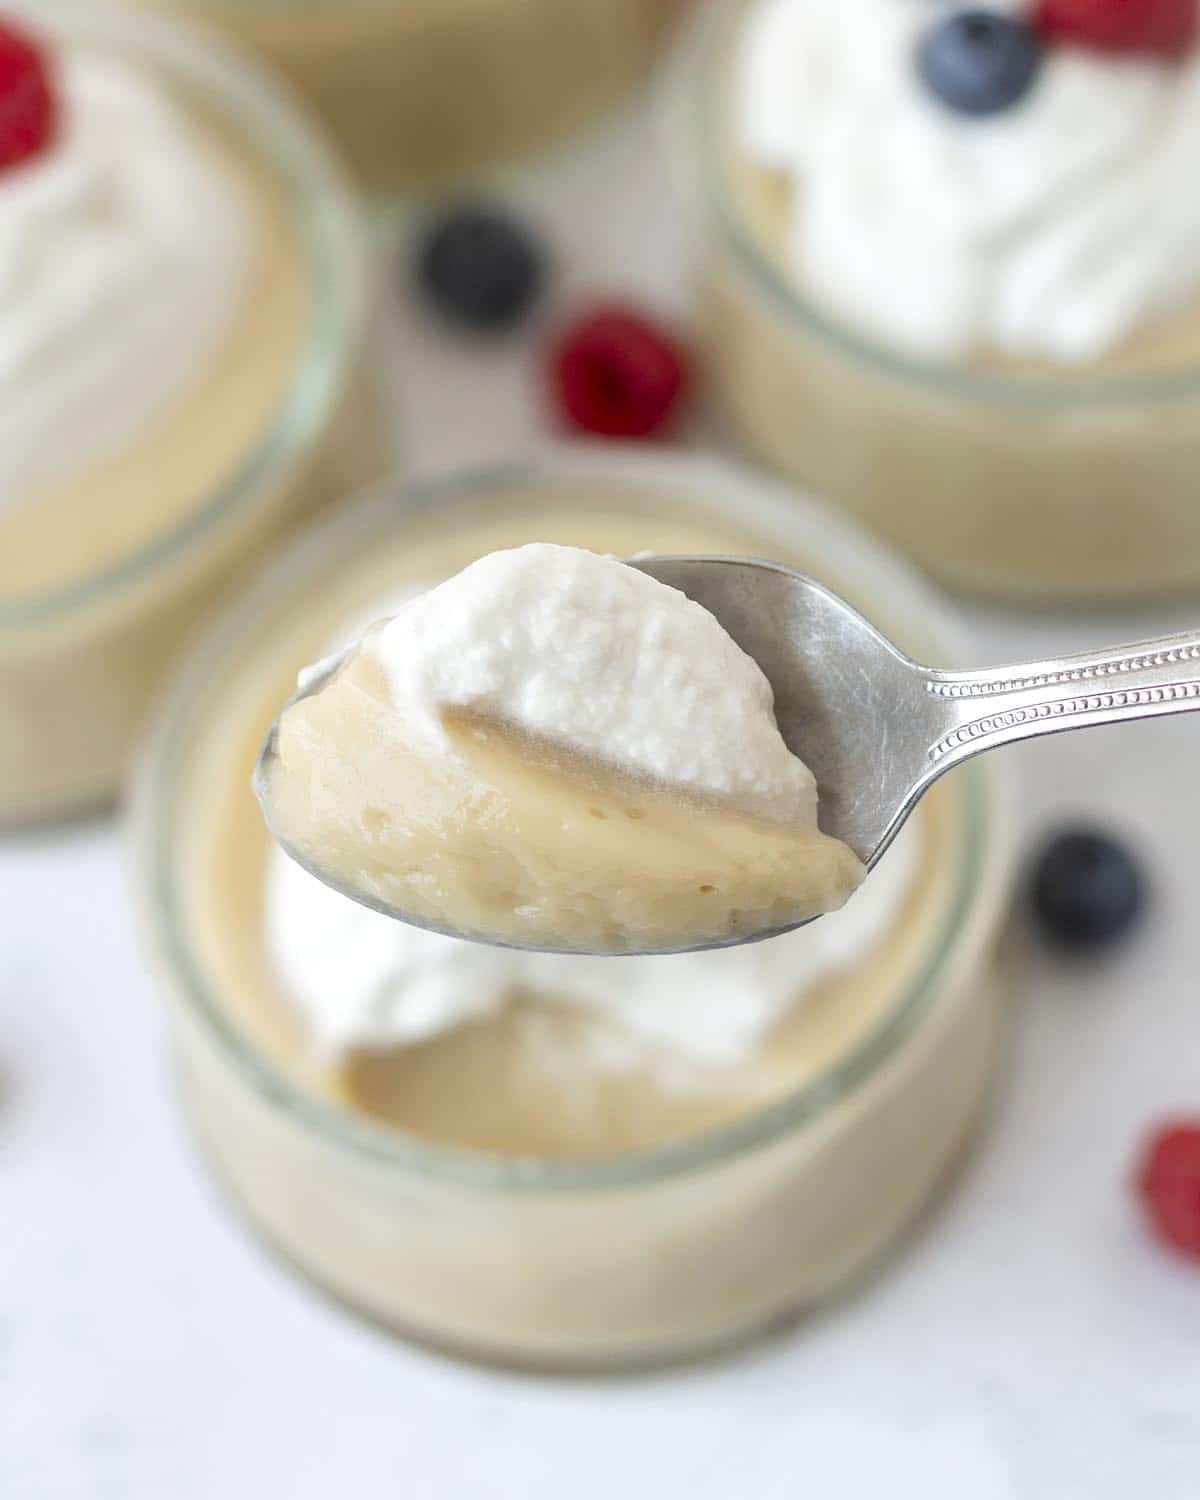 Eggless vanilla pudding and whipped cream on a spoon.